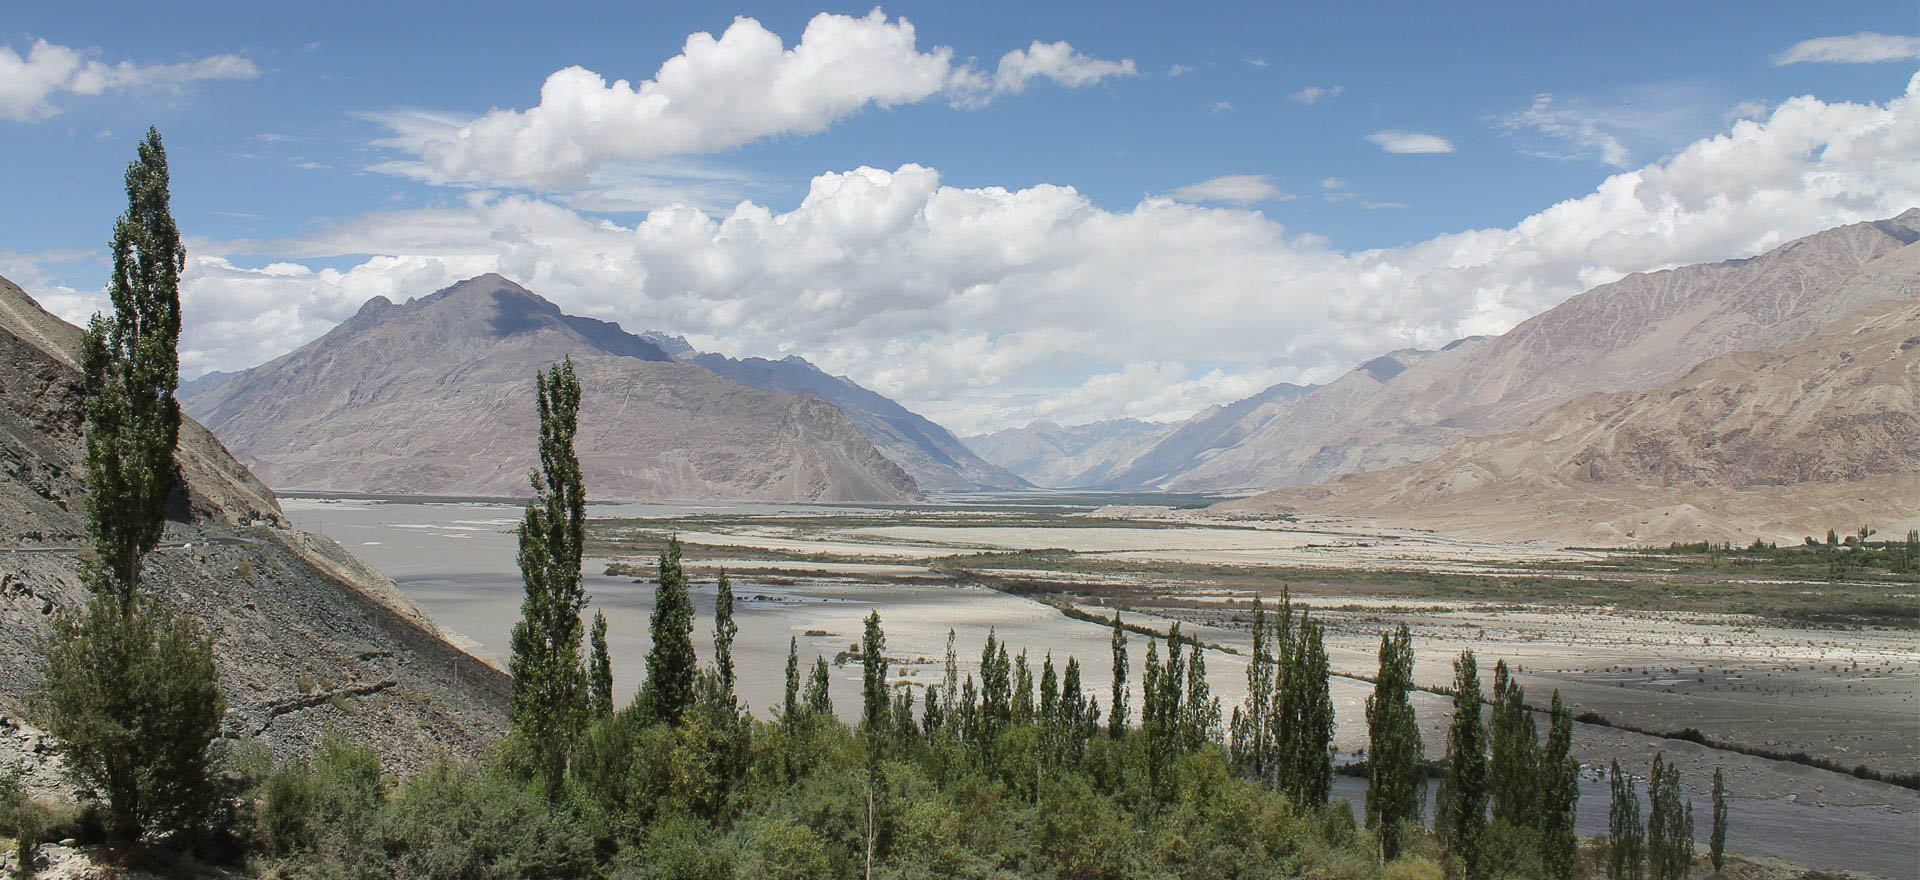 Mountain scenery in Ladakh - India Holidays and Tours